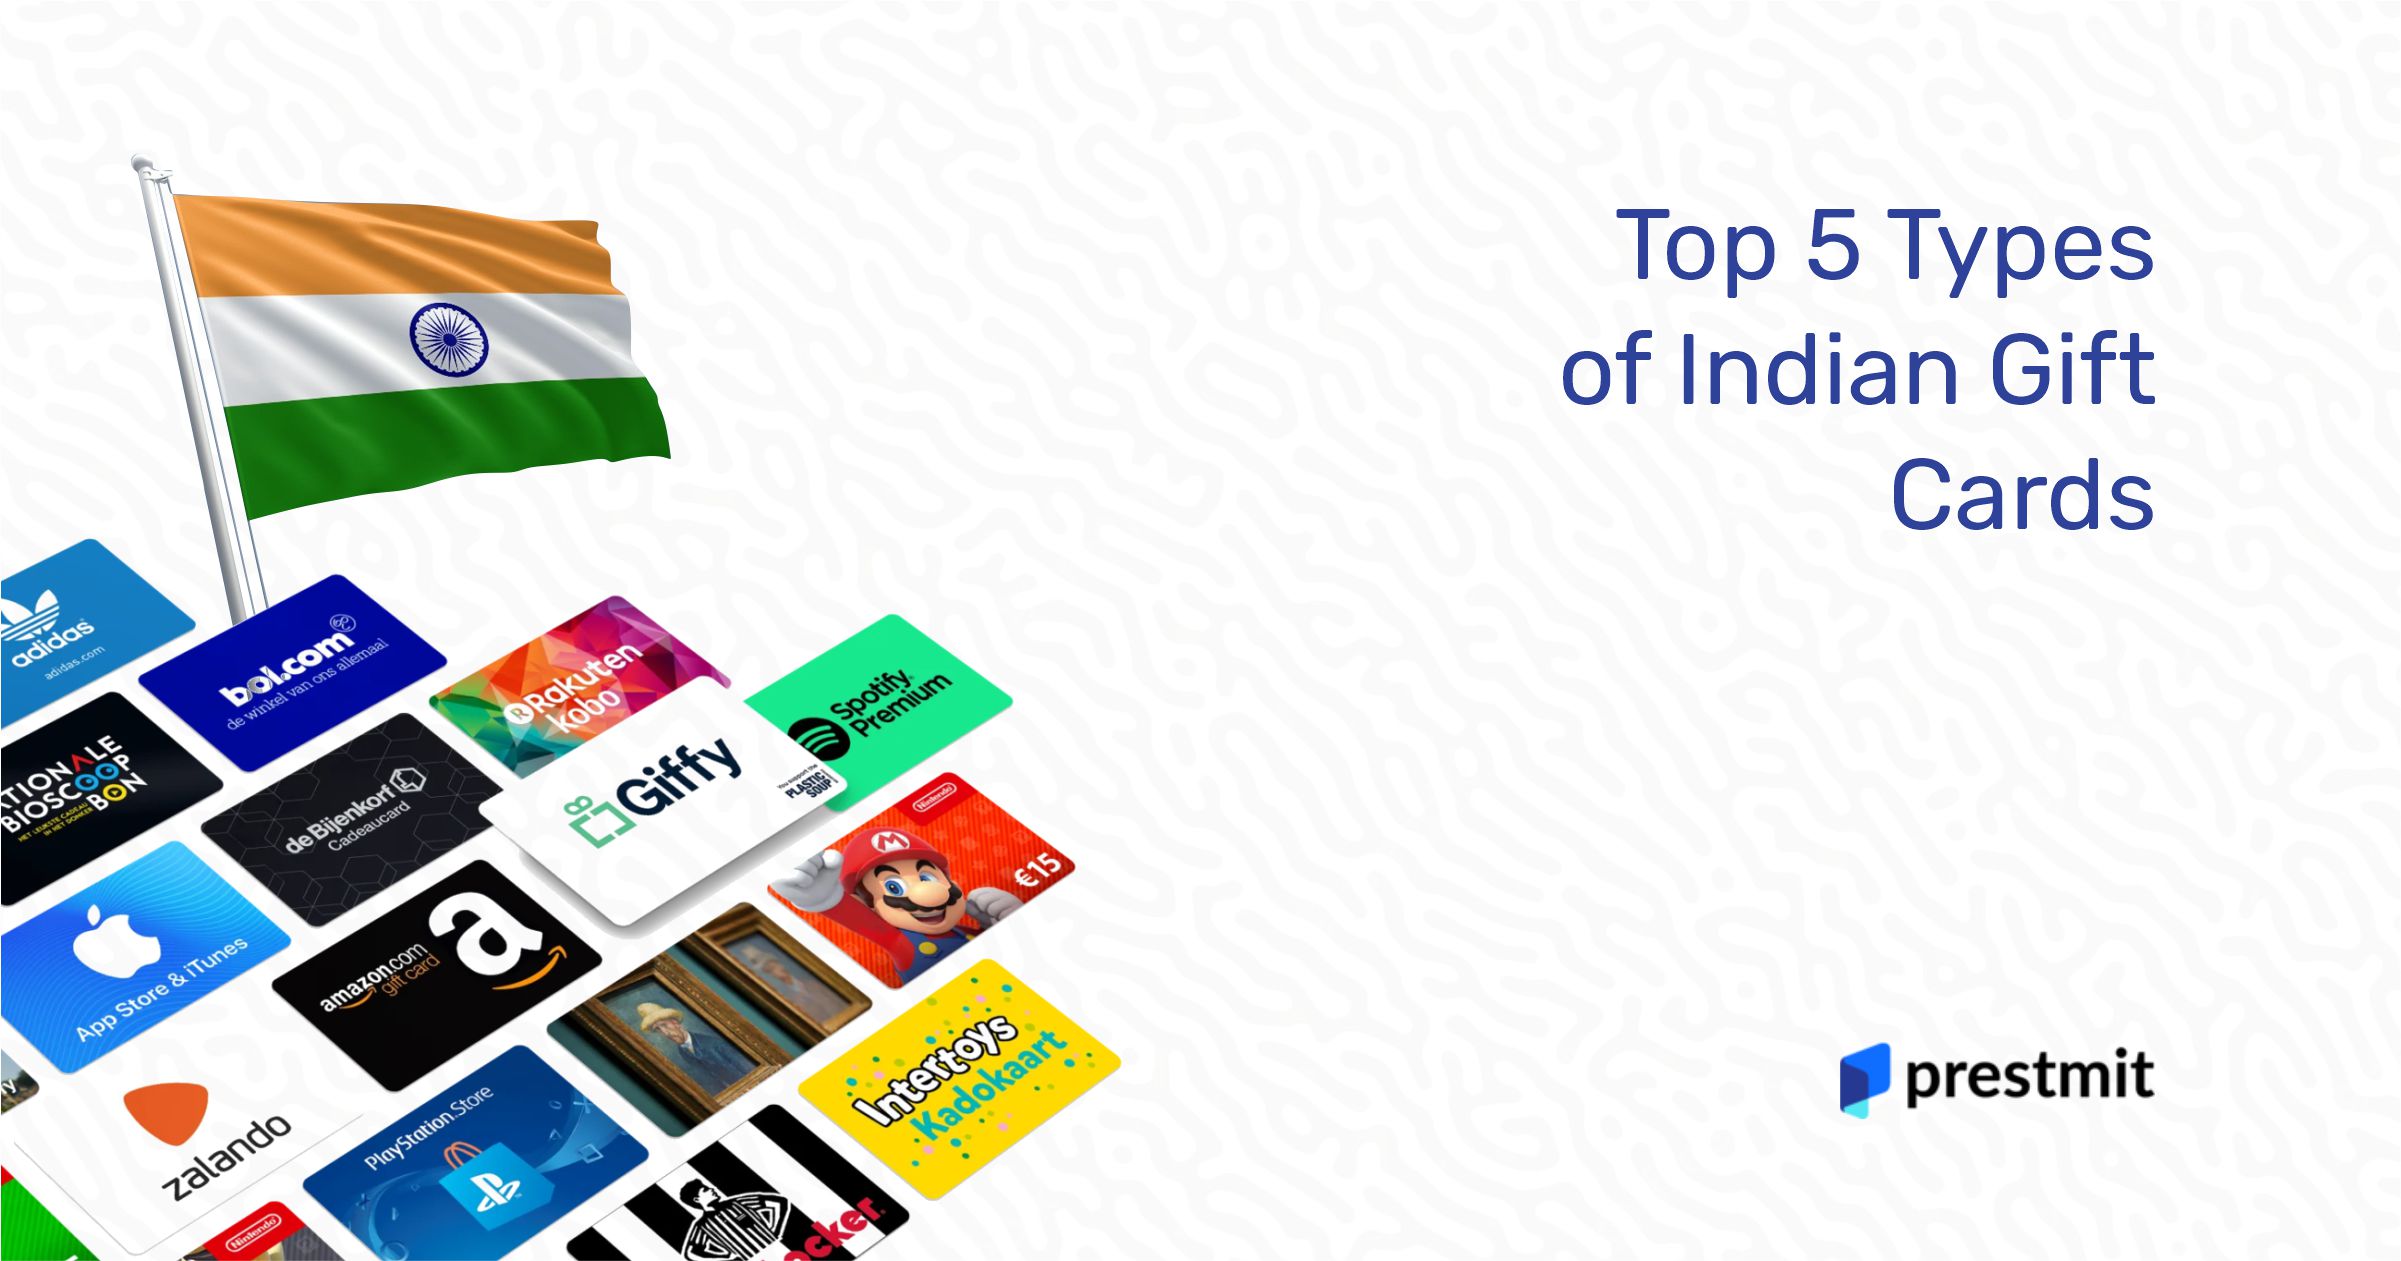 Top 5 Types Of Indian Gift Cards - Popular Gift Cards In India - Prestmit